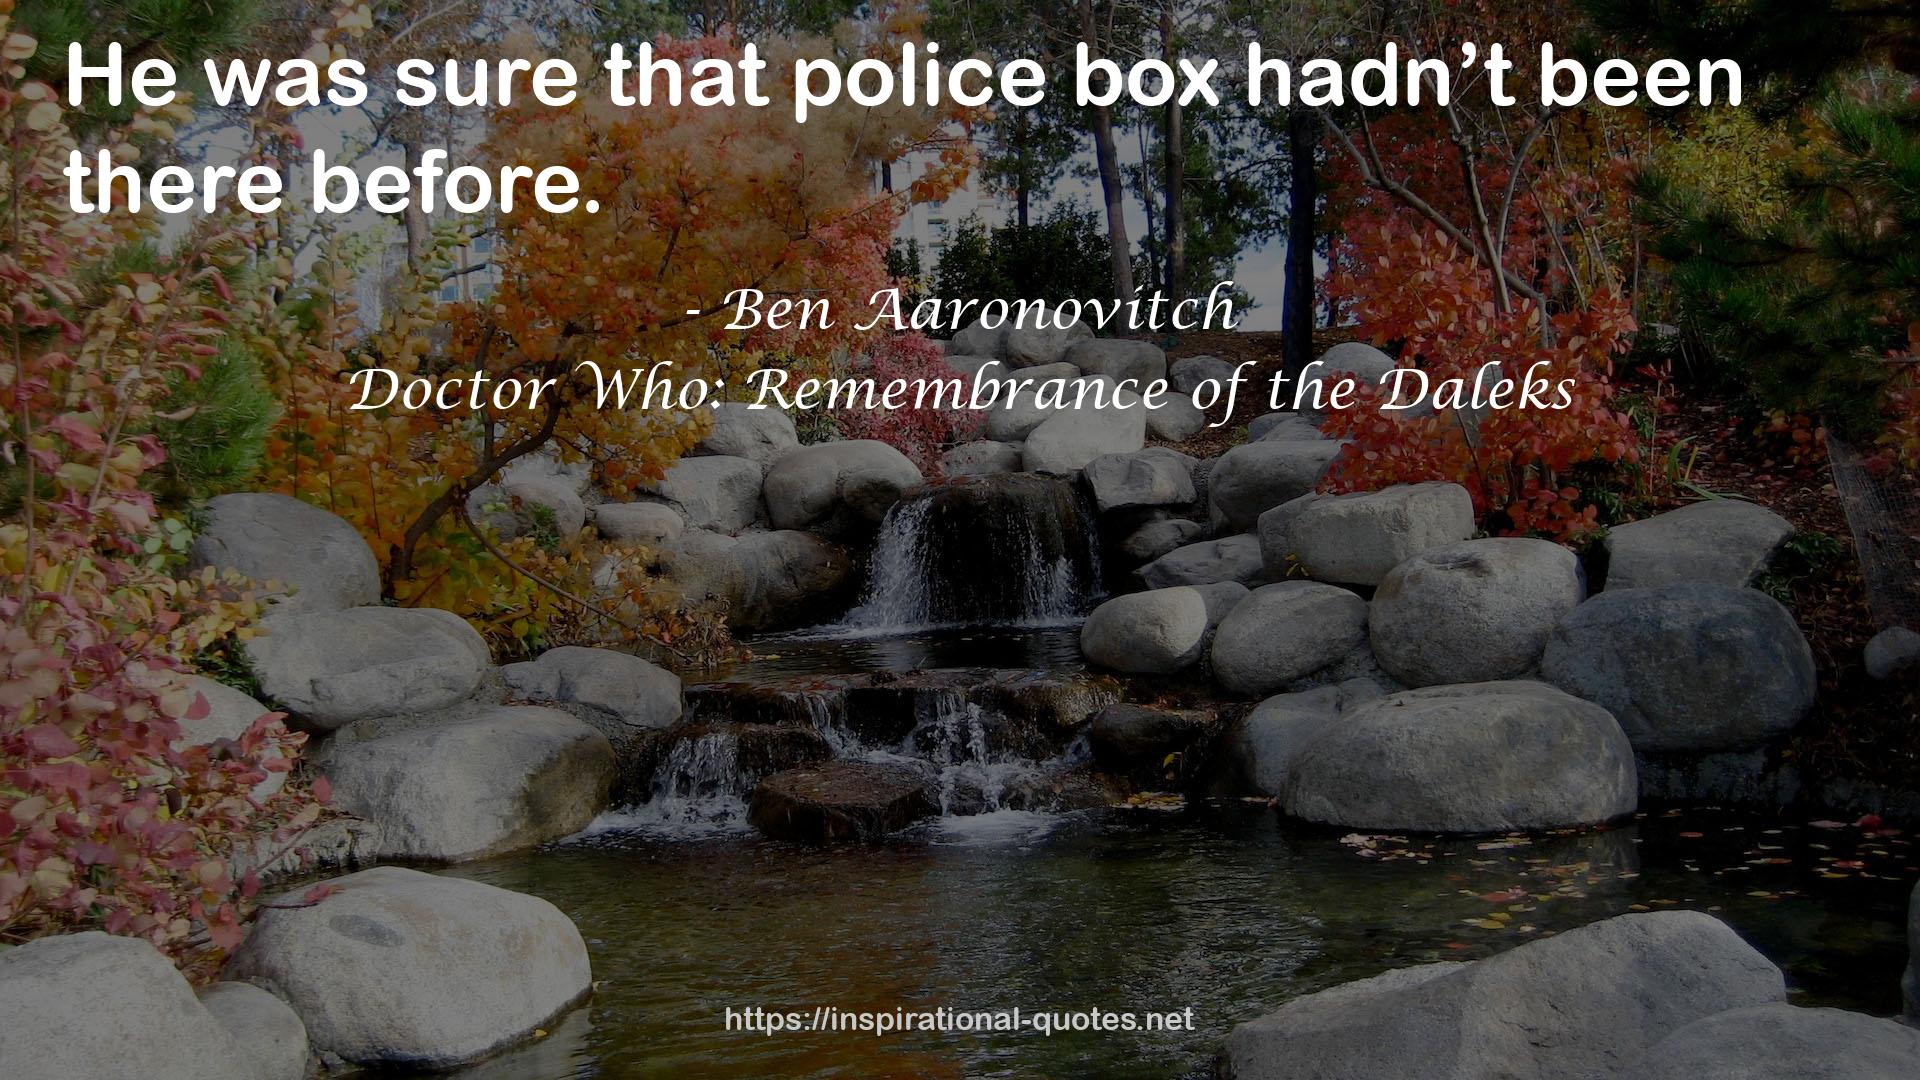 Doctor Who: Remembrance of the Daleks QUOTES